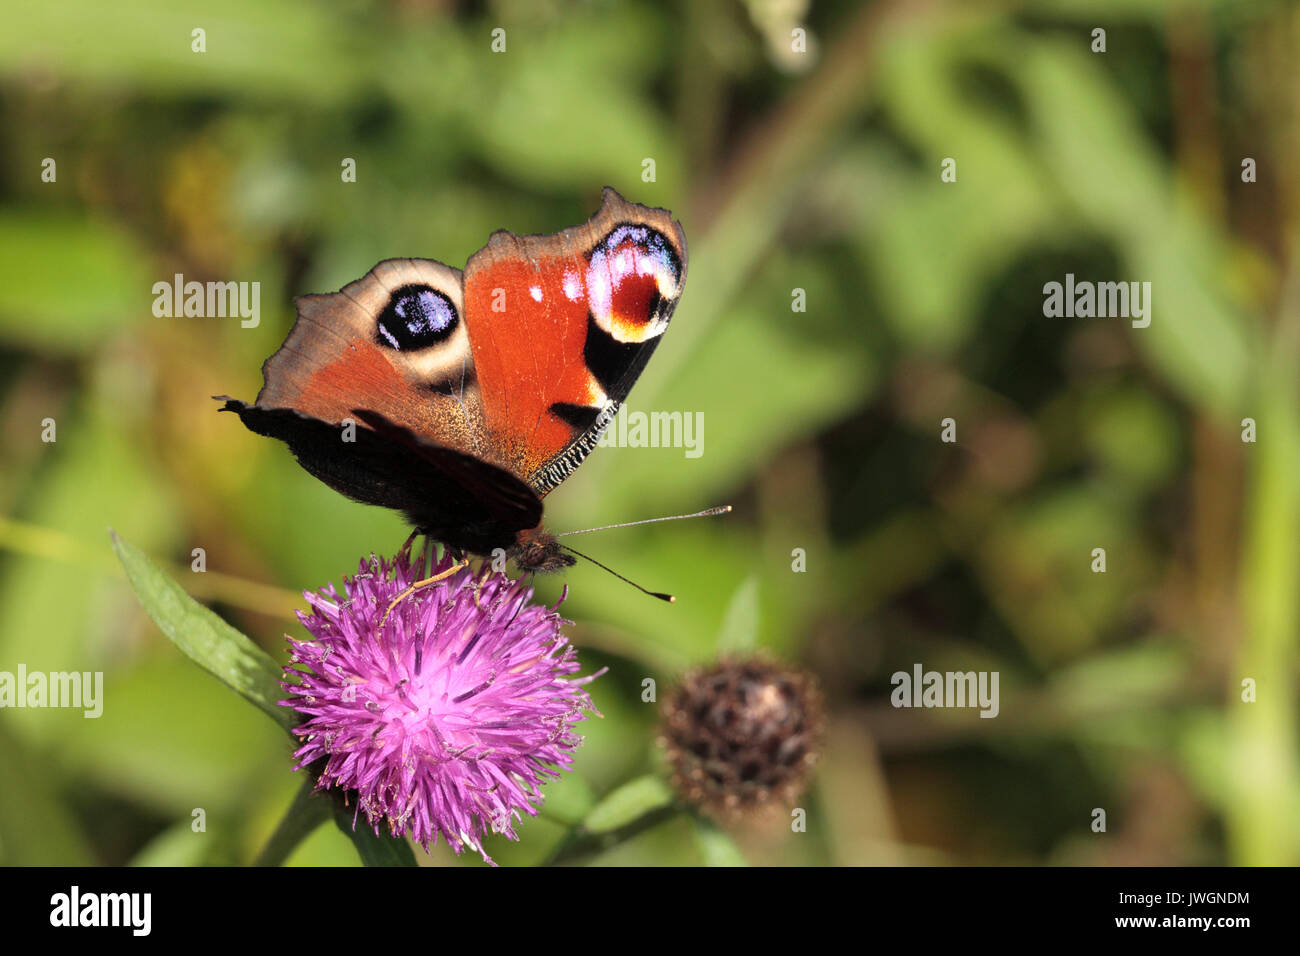 Peacock Butterfly on Knapweed Stock Photo